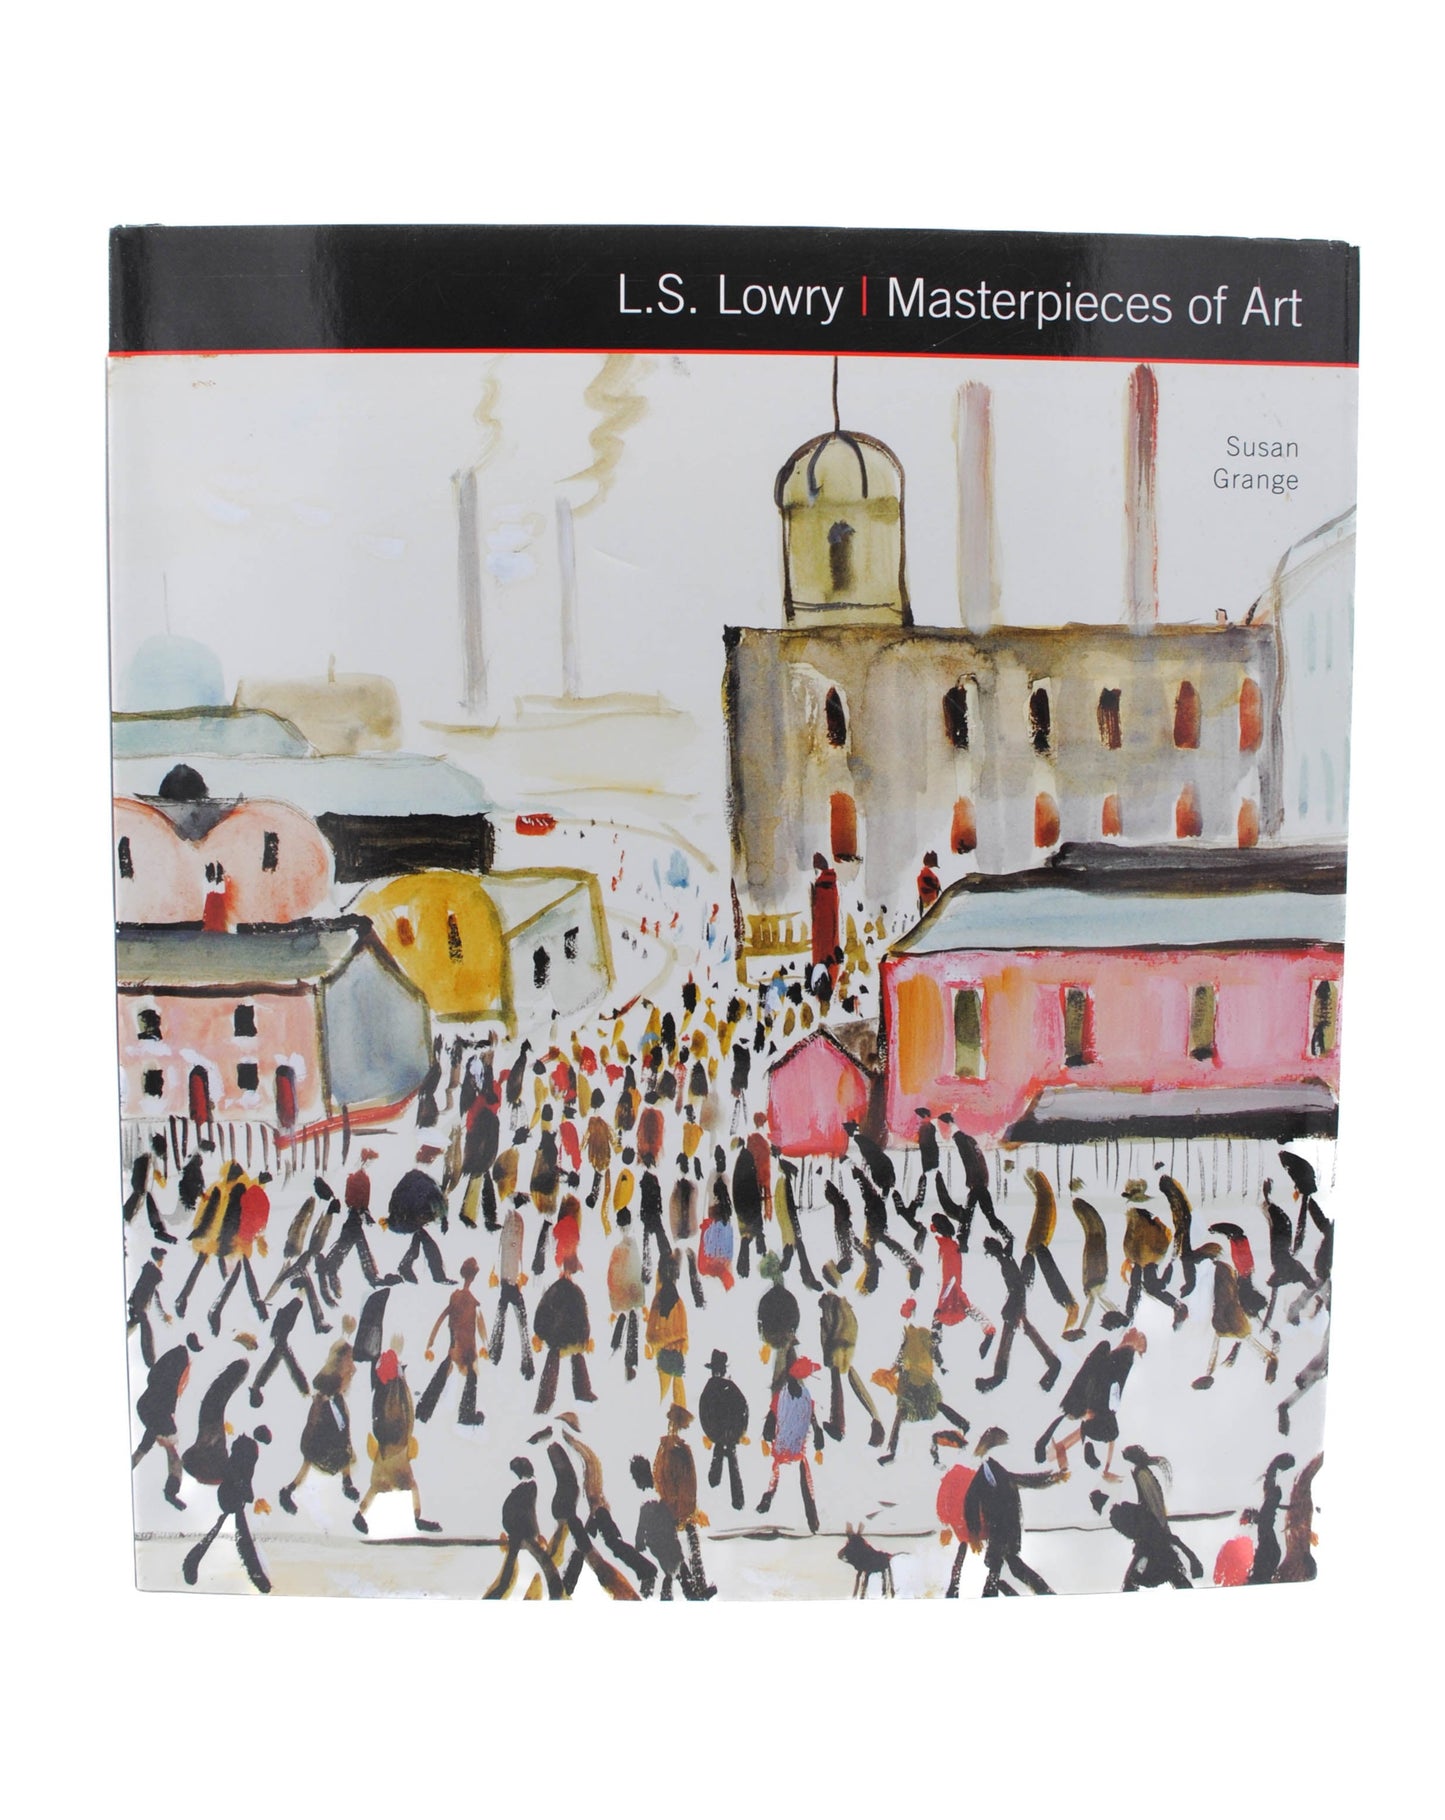 L.S. Lowry Masterpieces of Art